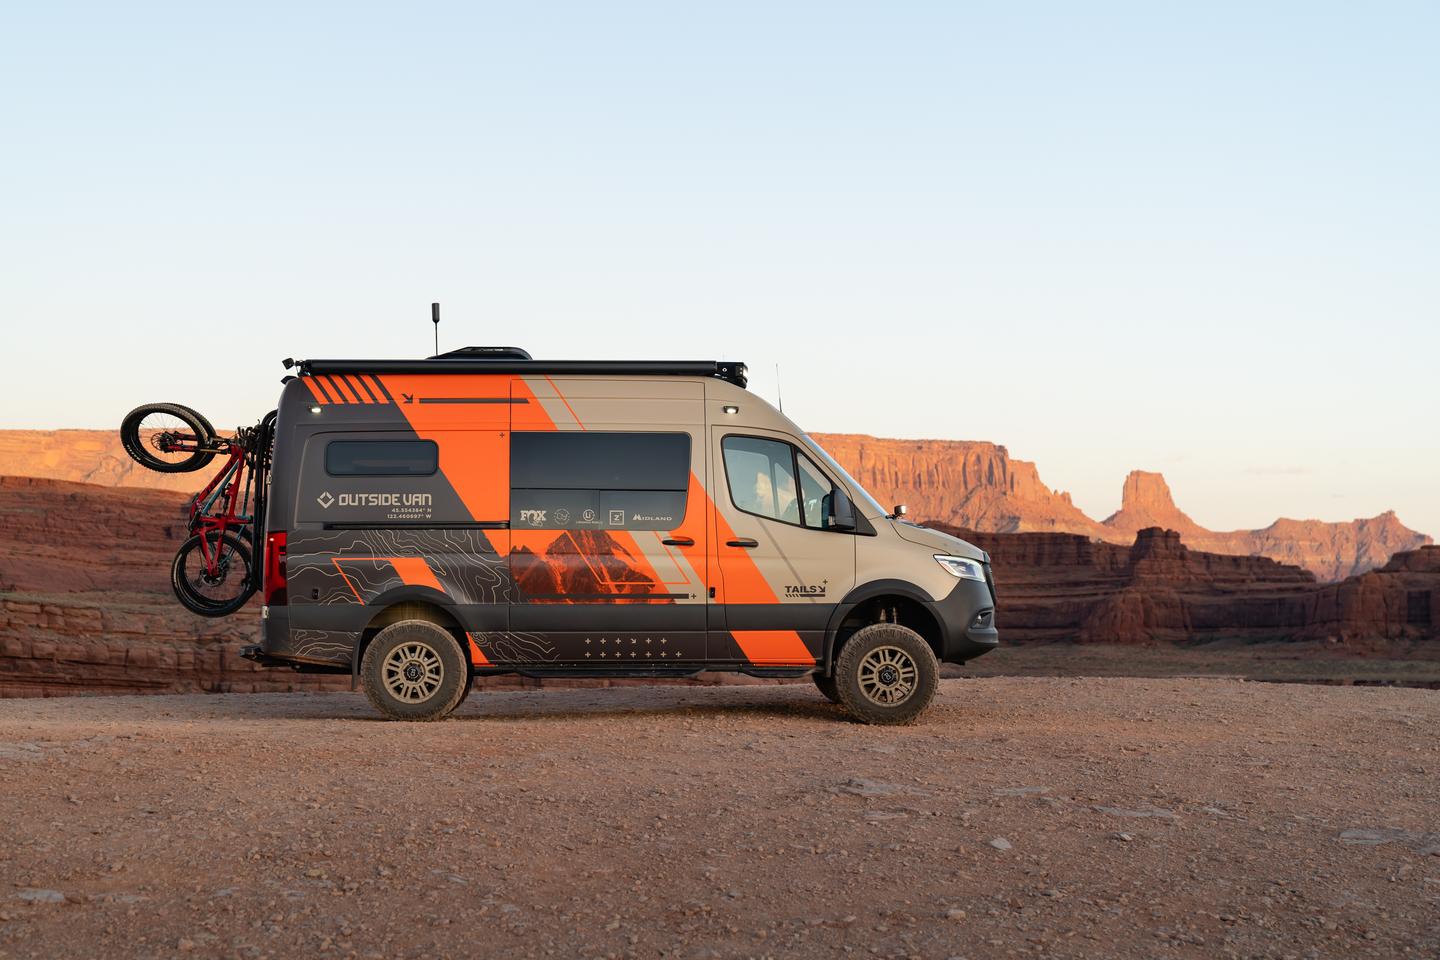 The Tails camper van comes built on a 144-in-wheelbase Mercedes Sprinter 4x4